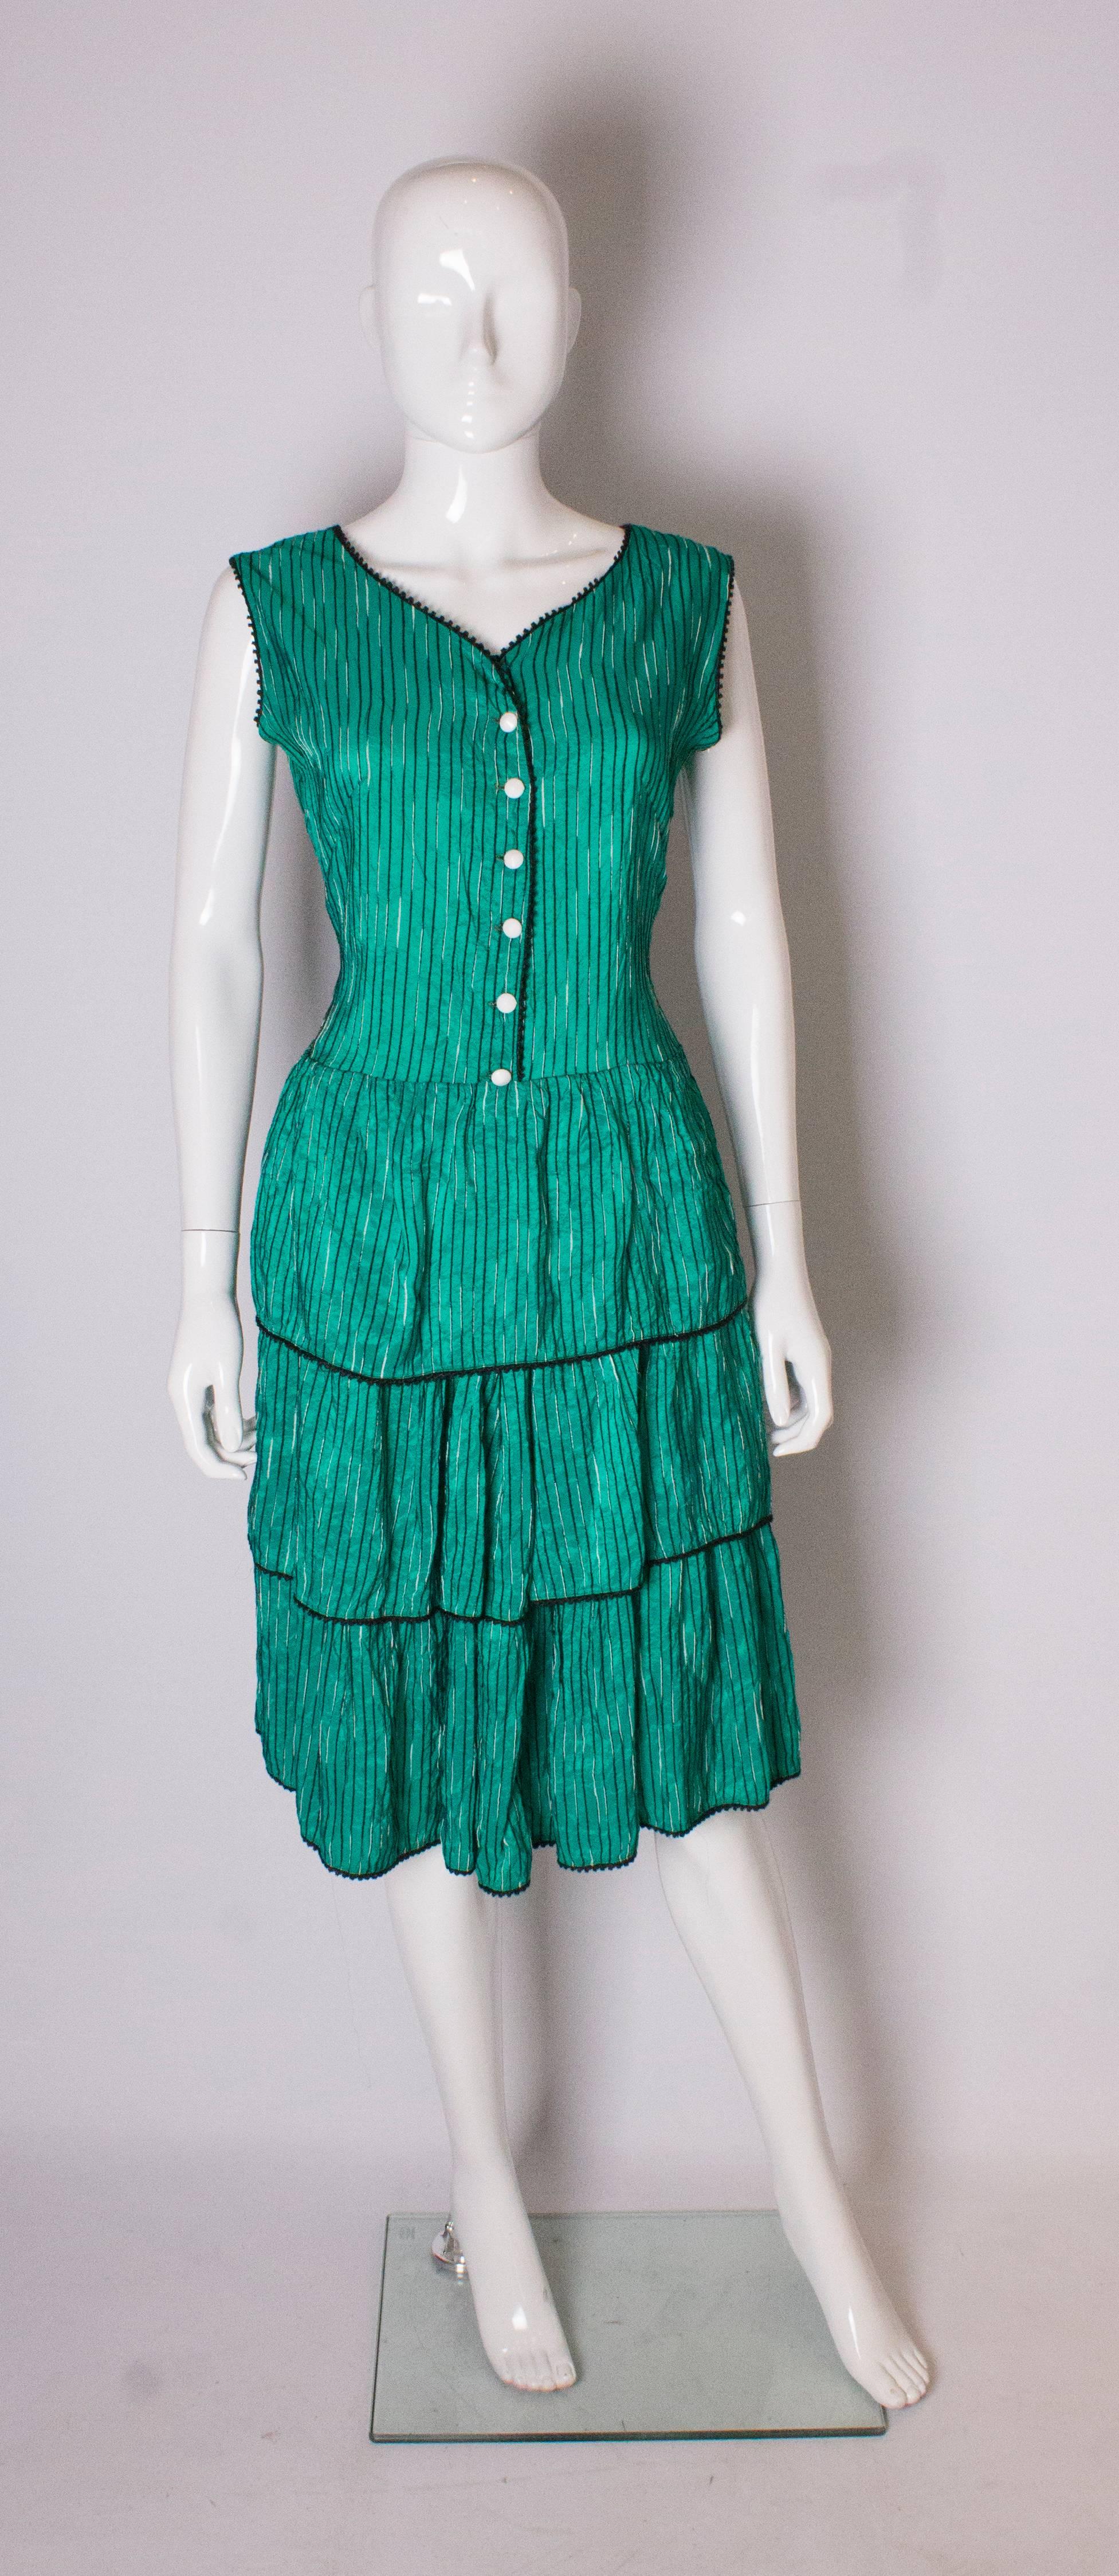 A great sundress in a bright emerald green fabric with black and white stripes, and white buttons down the front.  It has a drop waist, 2 layers of ruffles, and black braid along the neckline and armholes.